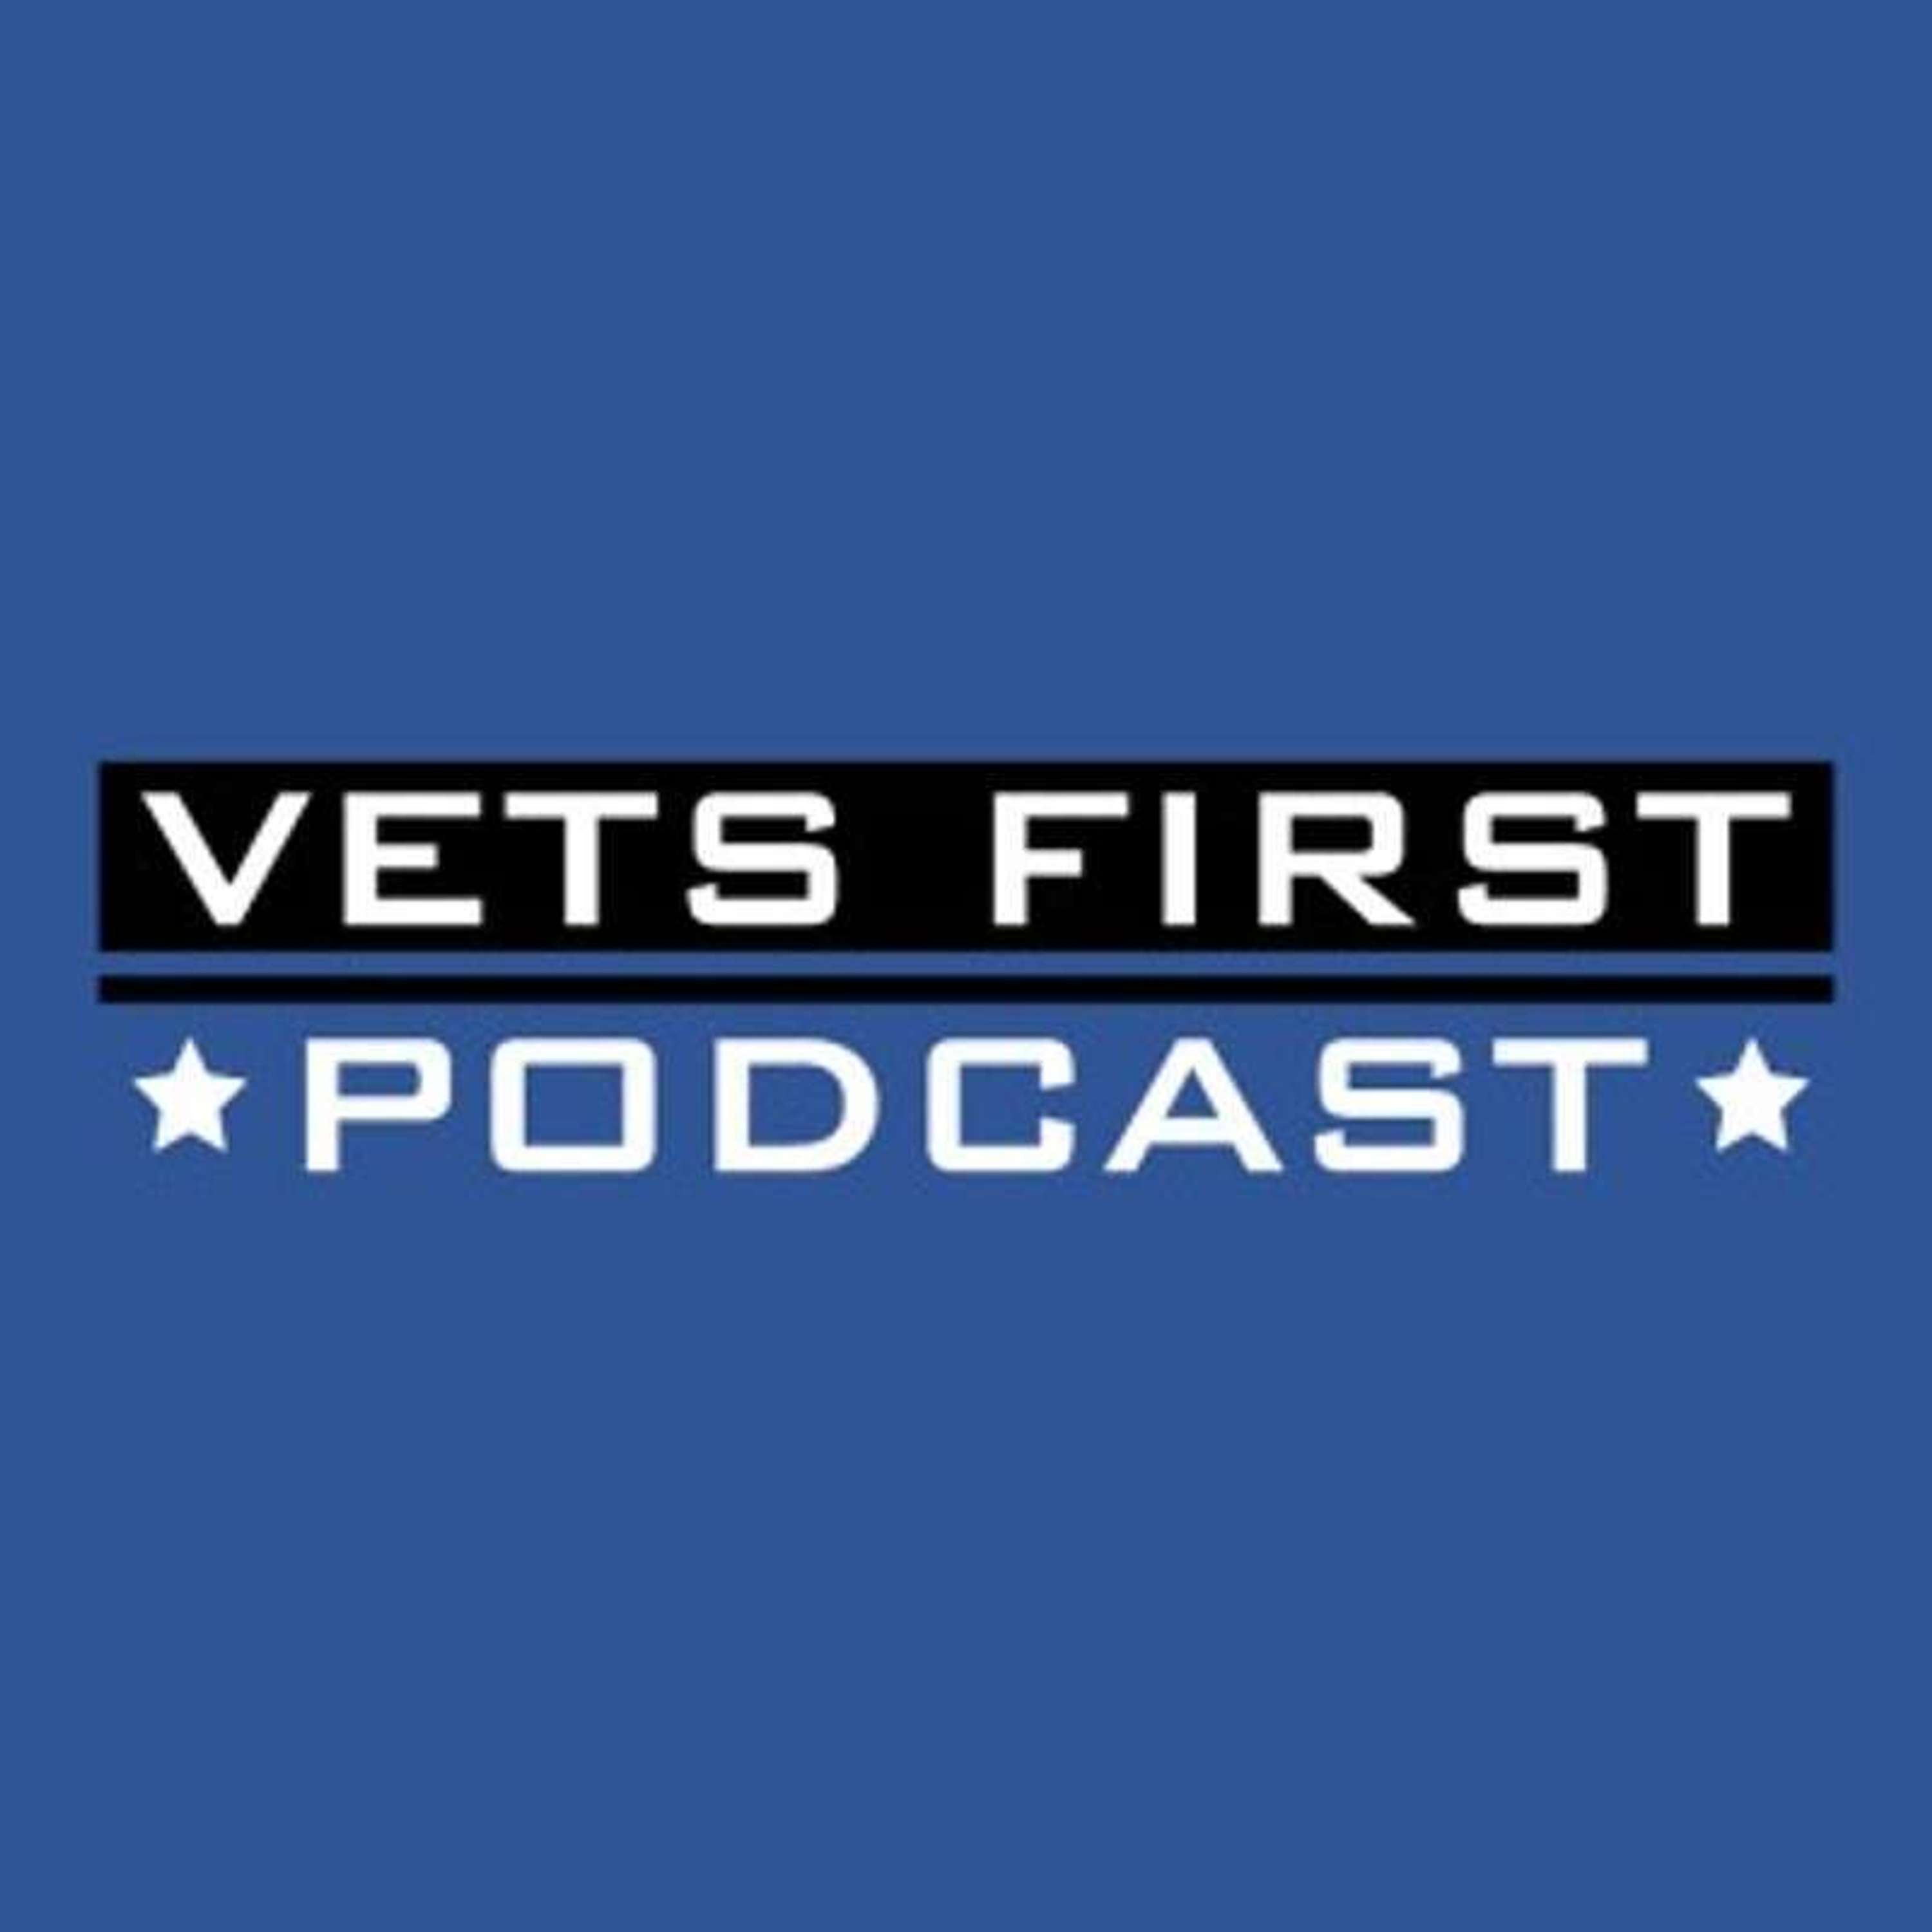 Season 2 Episode 1 – Kicking off Season 2 of the Vets First Podcast